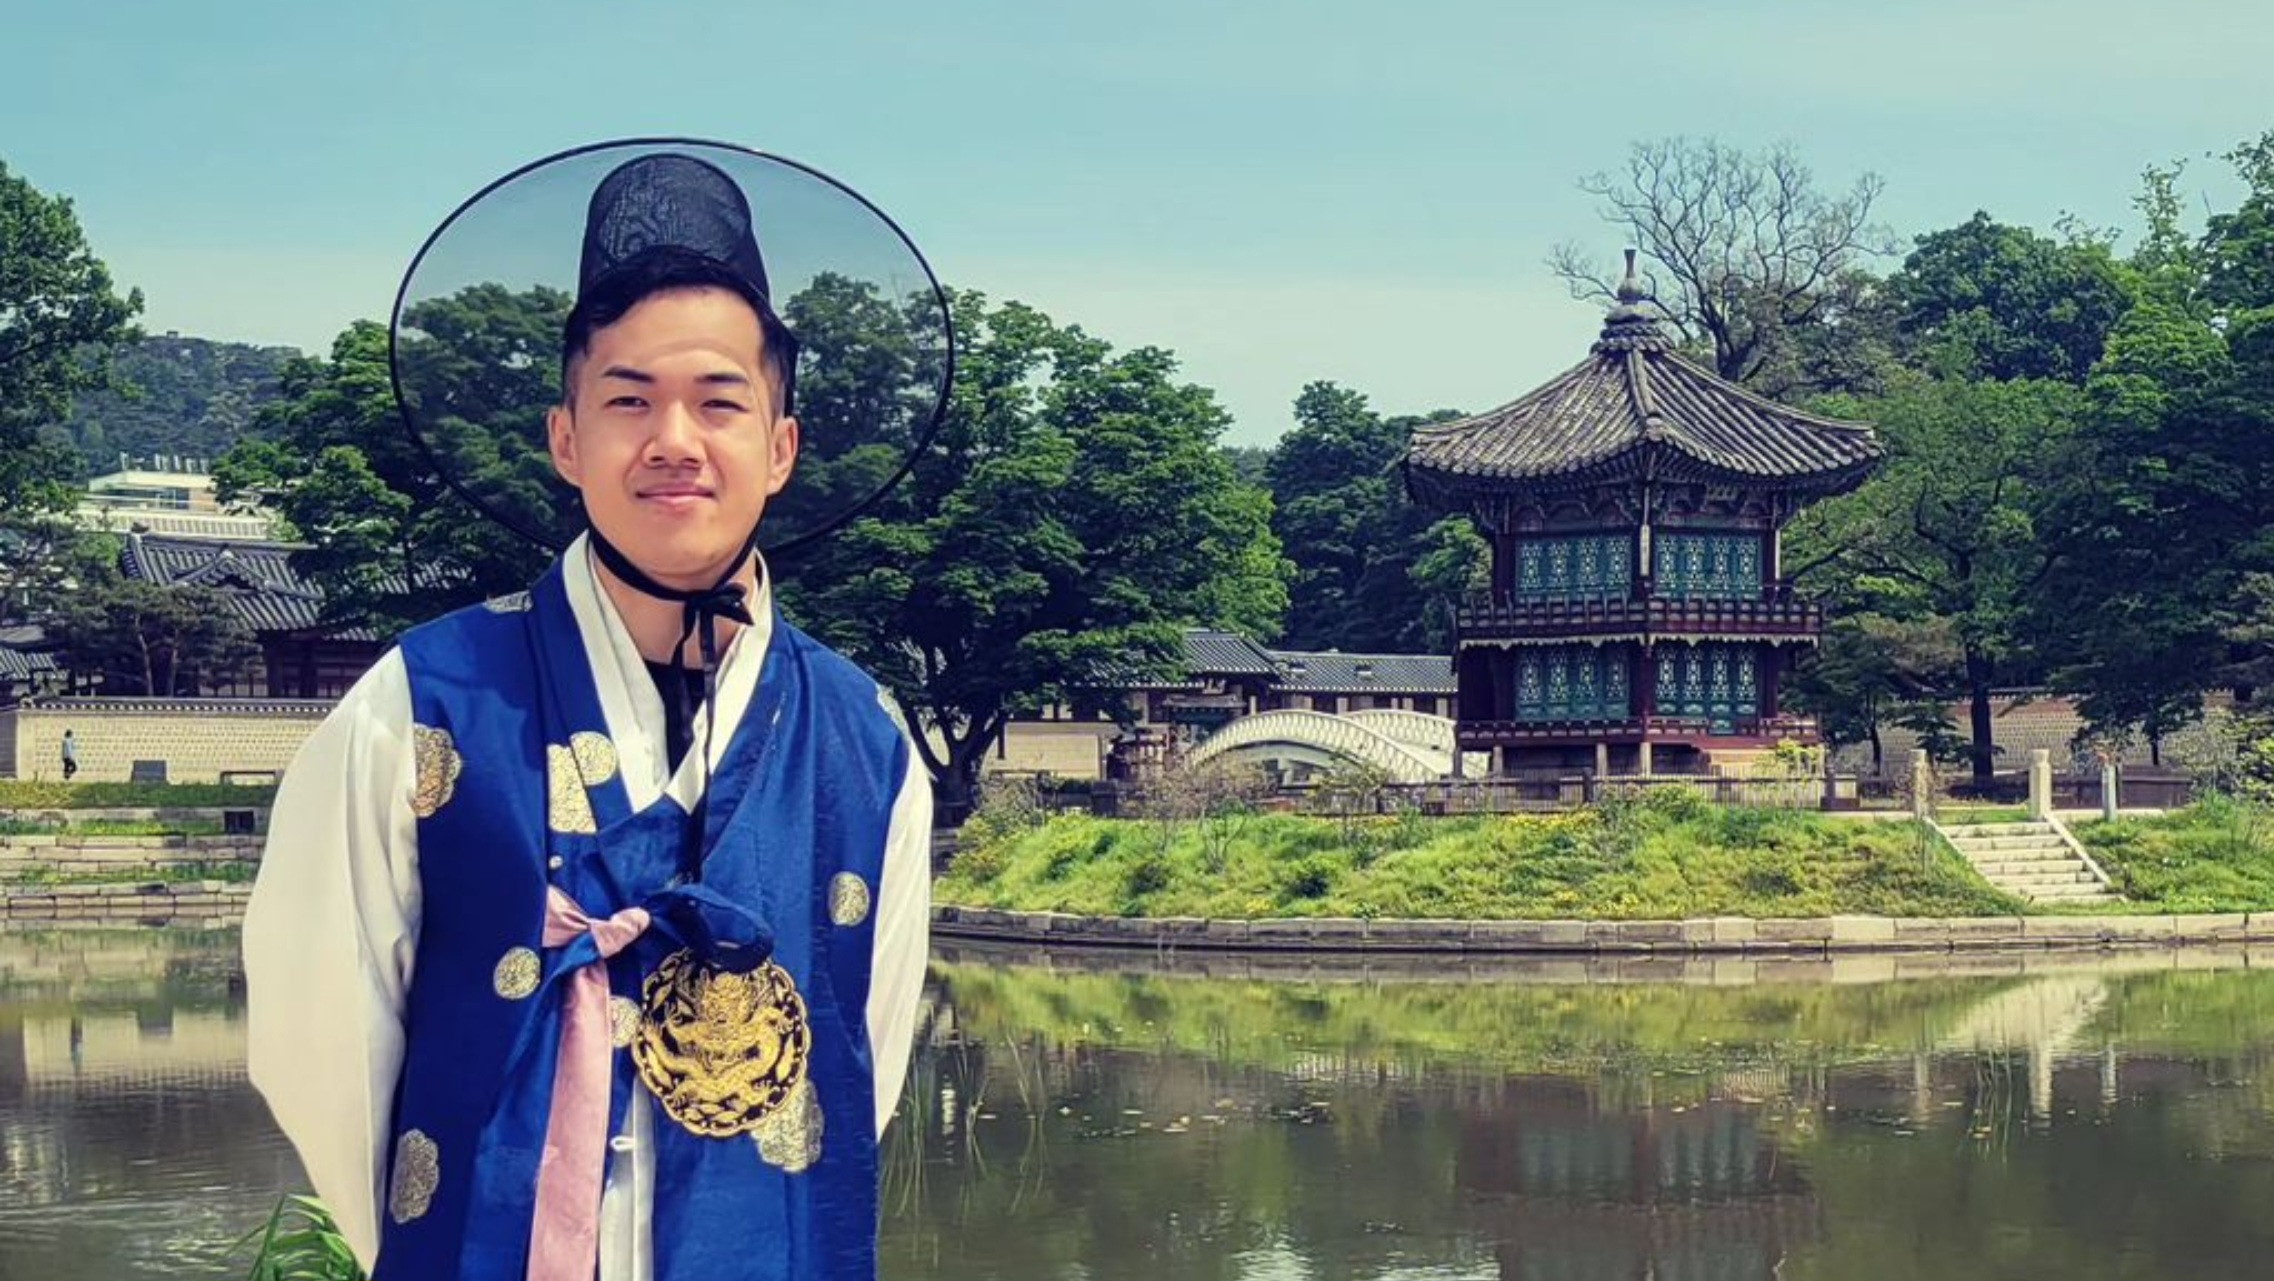 It's me! Dressed in Korean prince attire at Gyeongbokgung Palace